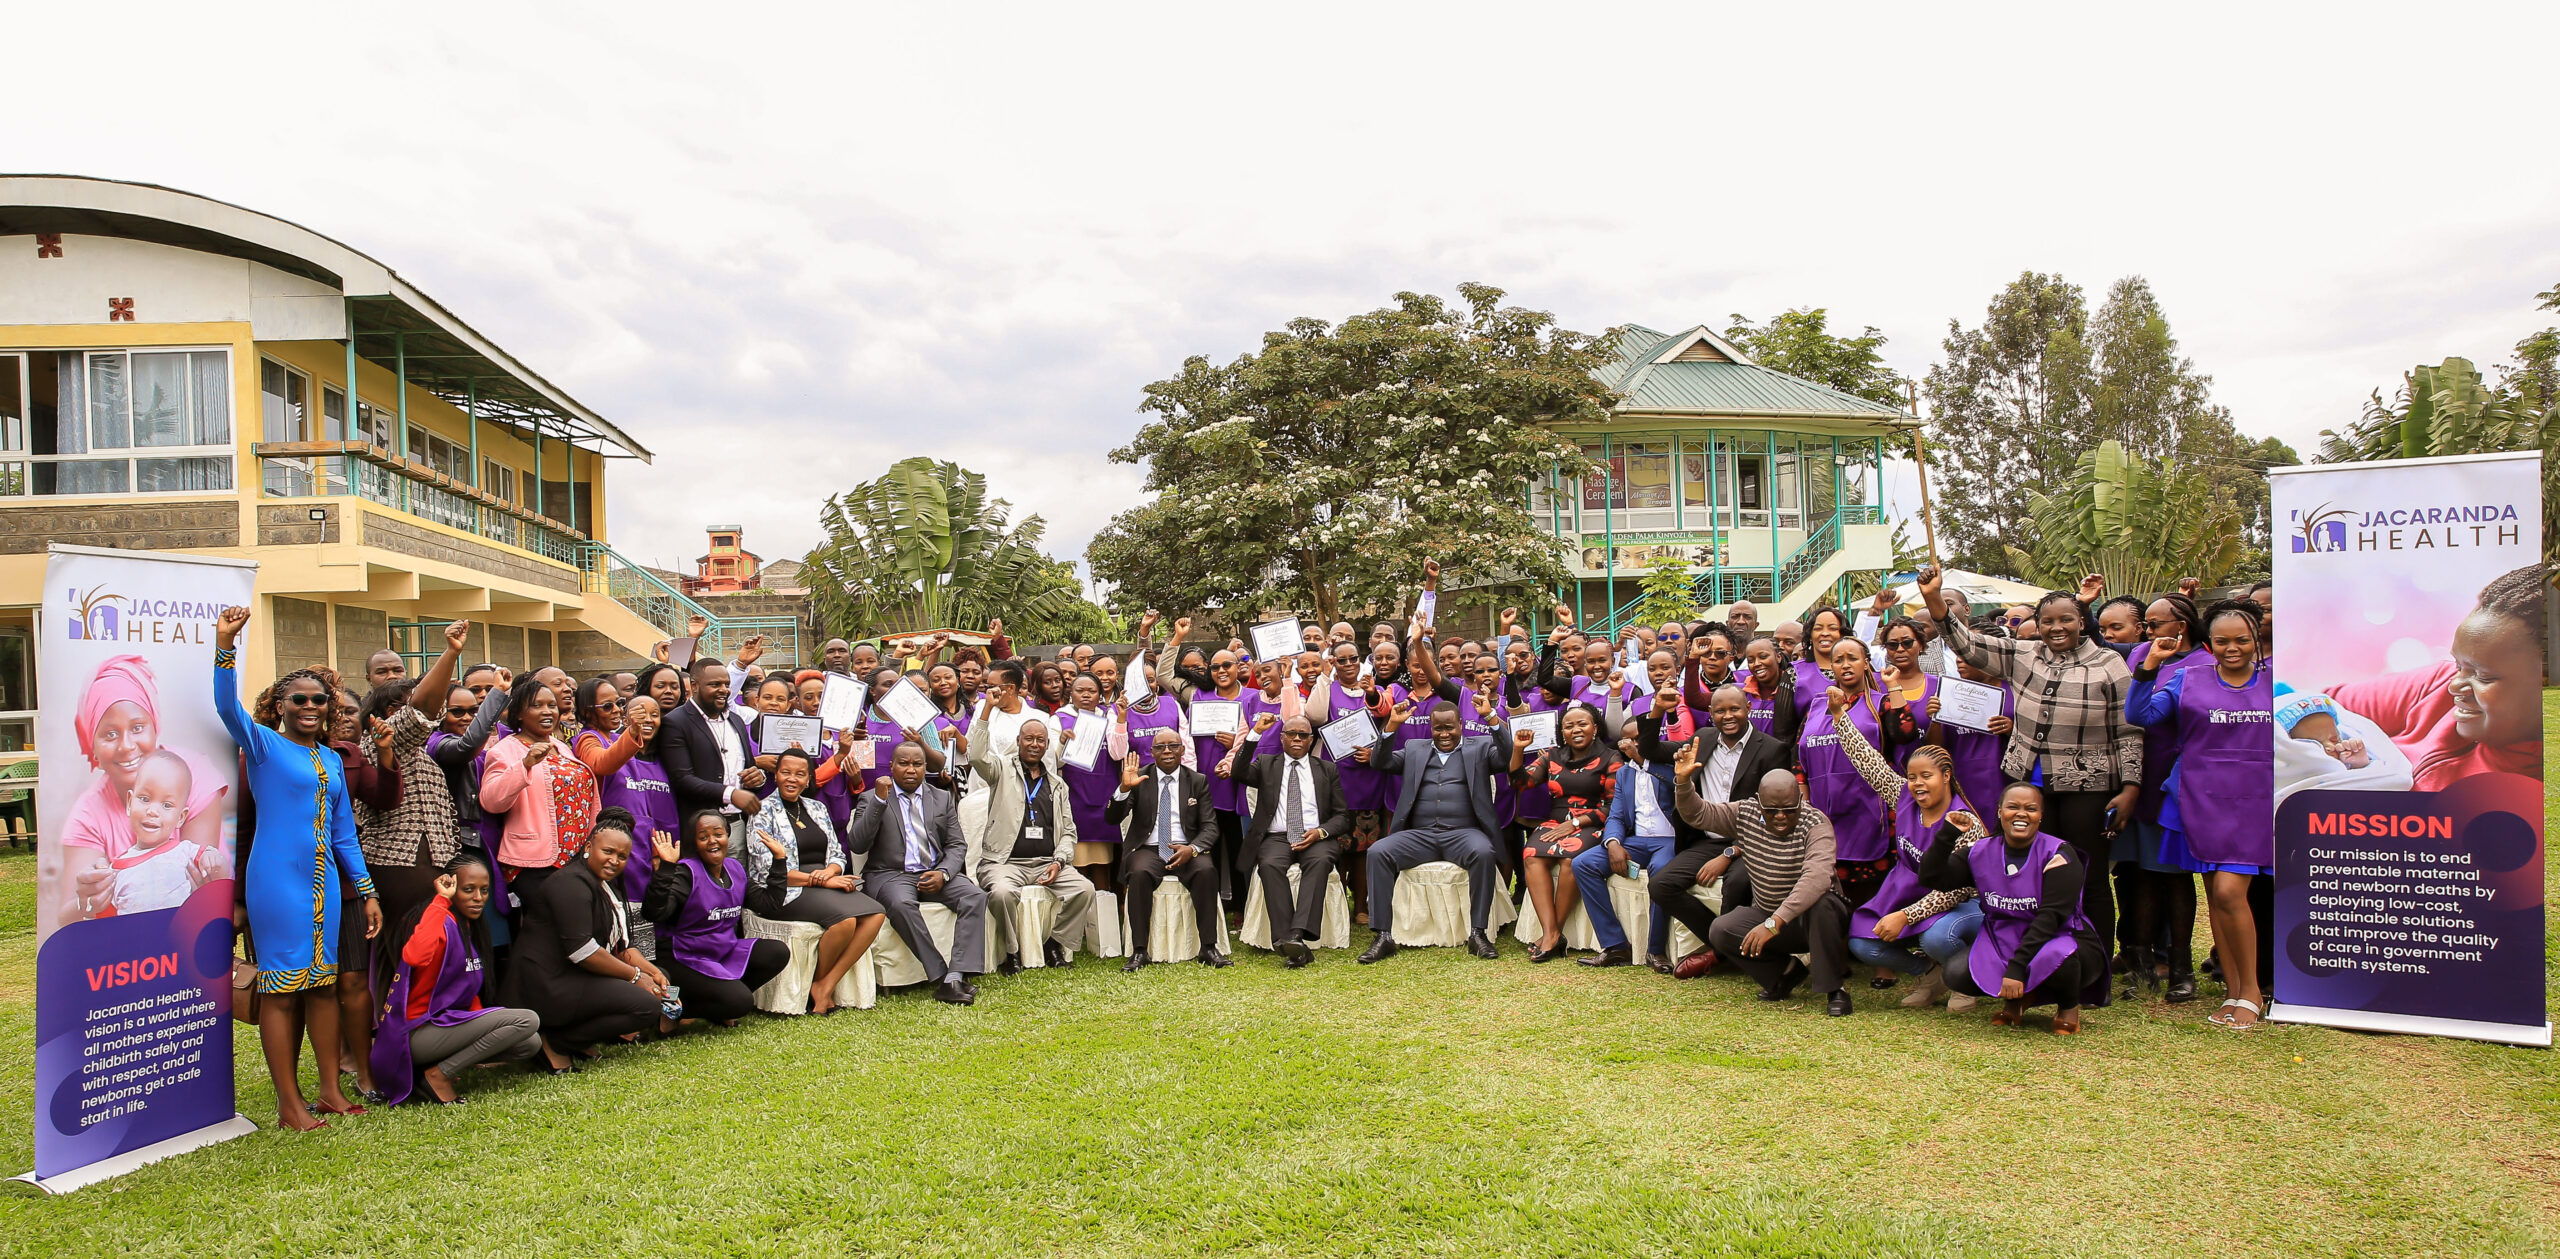 Frontline nurses in Murang’a County celebrate full curricula completion at a graduation ceremony attended by Jacaranda staff and county government representatives this July.